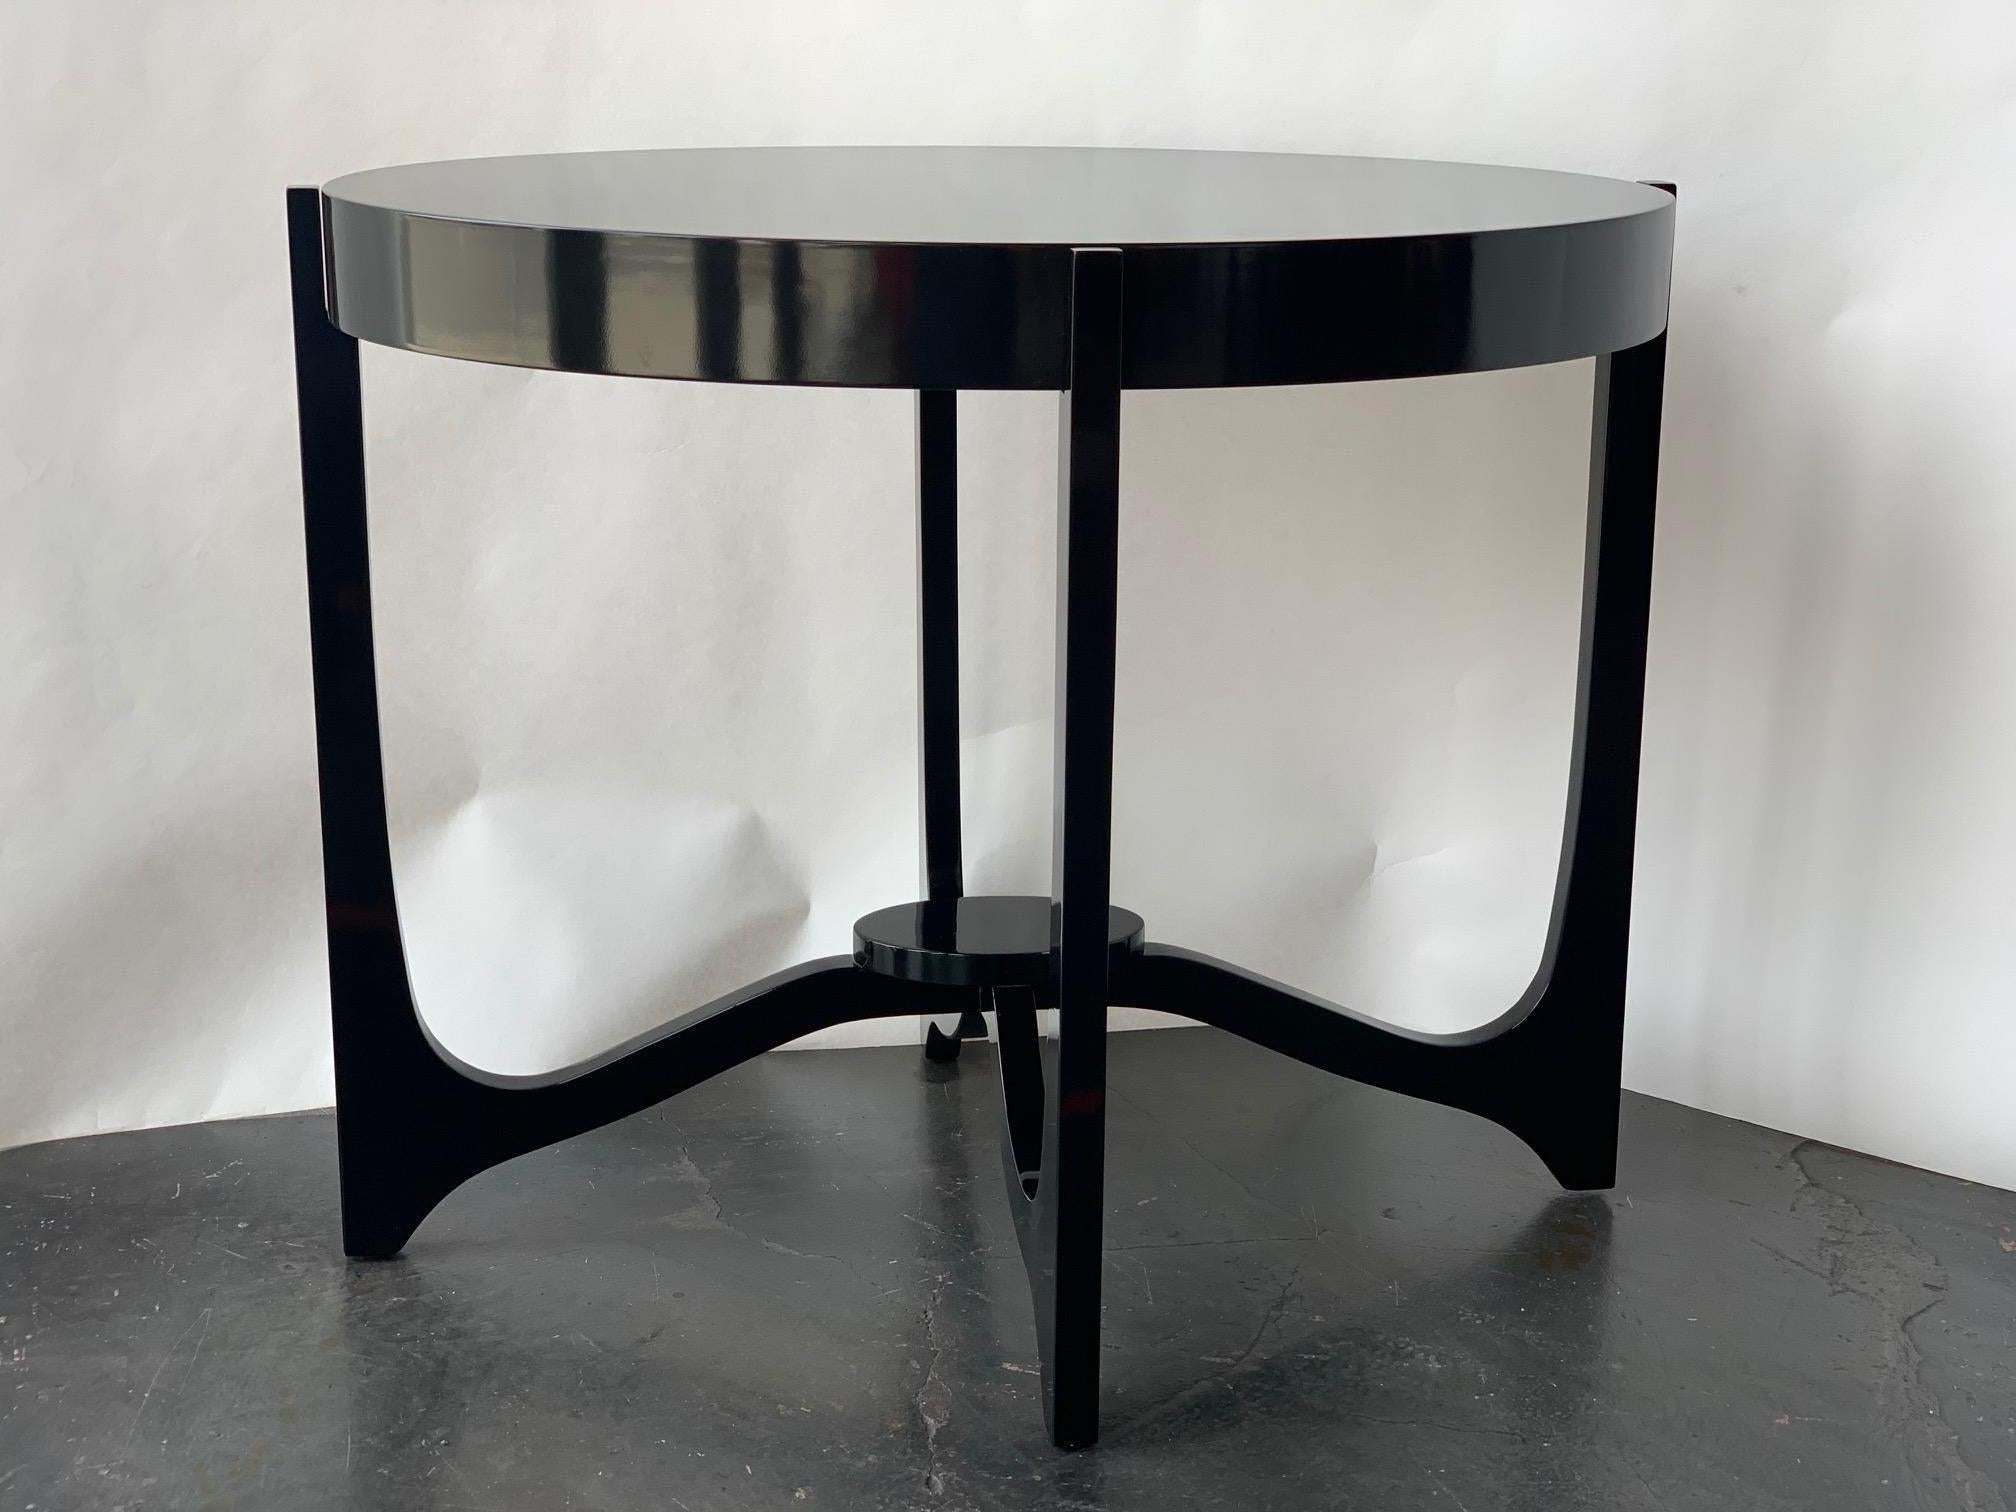 Pair of Italian oval side tables in black lacquer, Italy, 1980s.